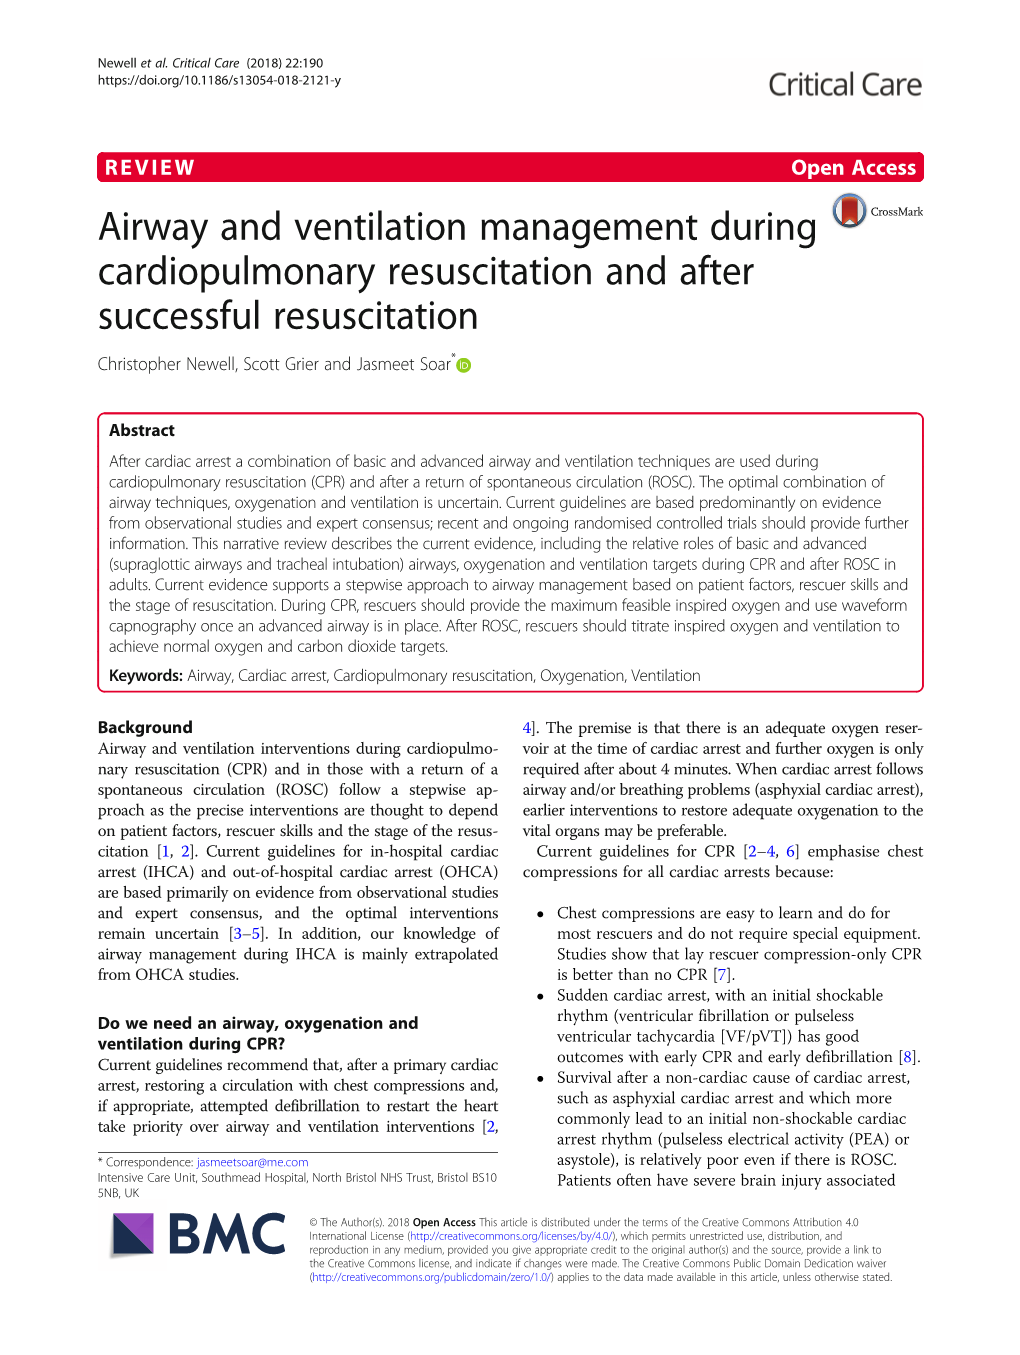 Airway and Ventilation Management During Cardiopulmonary Resuscitation and After Successful Resuscitation Christopher Newell, Scott Grier and Jasmeet Soar*